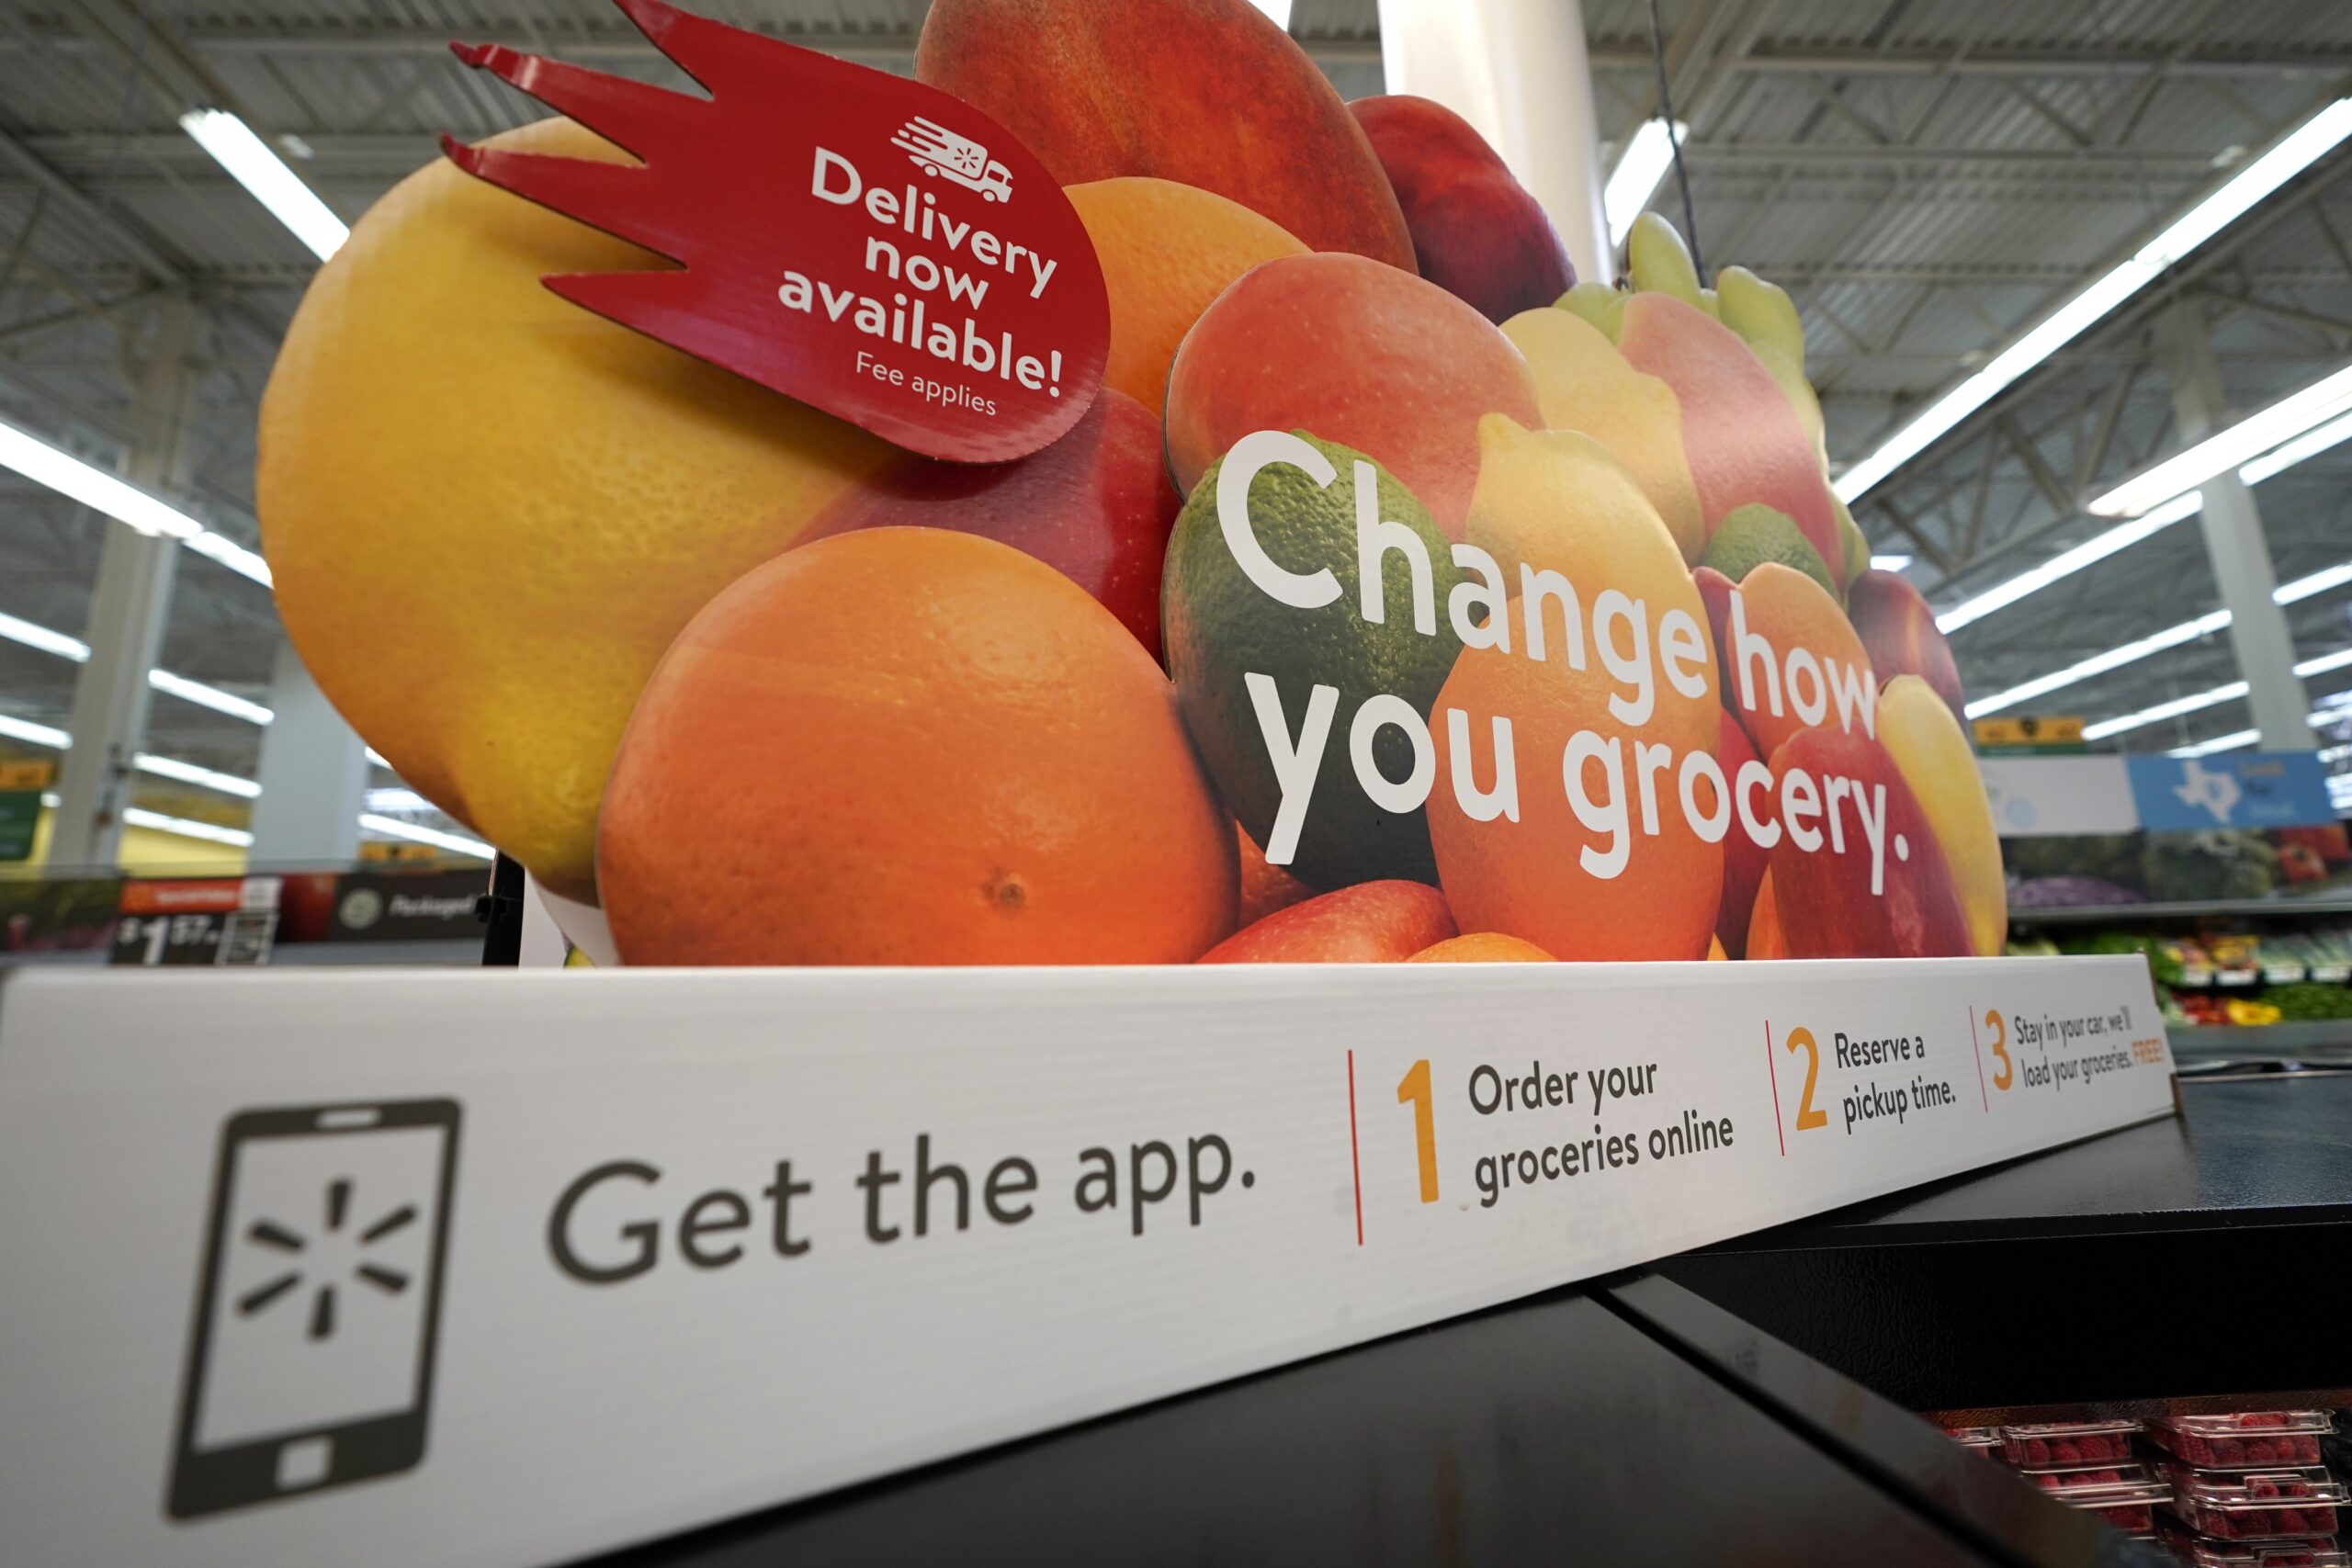 Walmart promotional sign for online grocery service